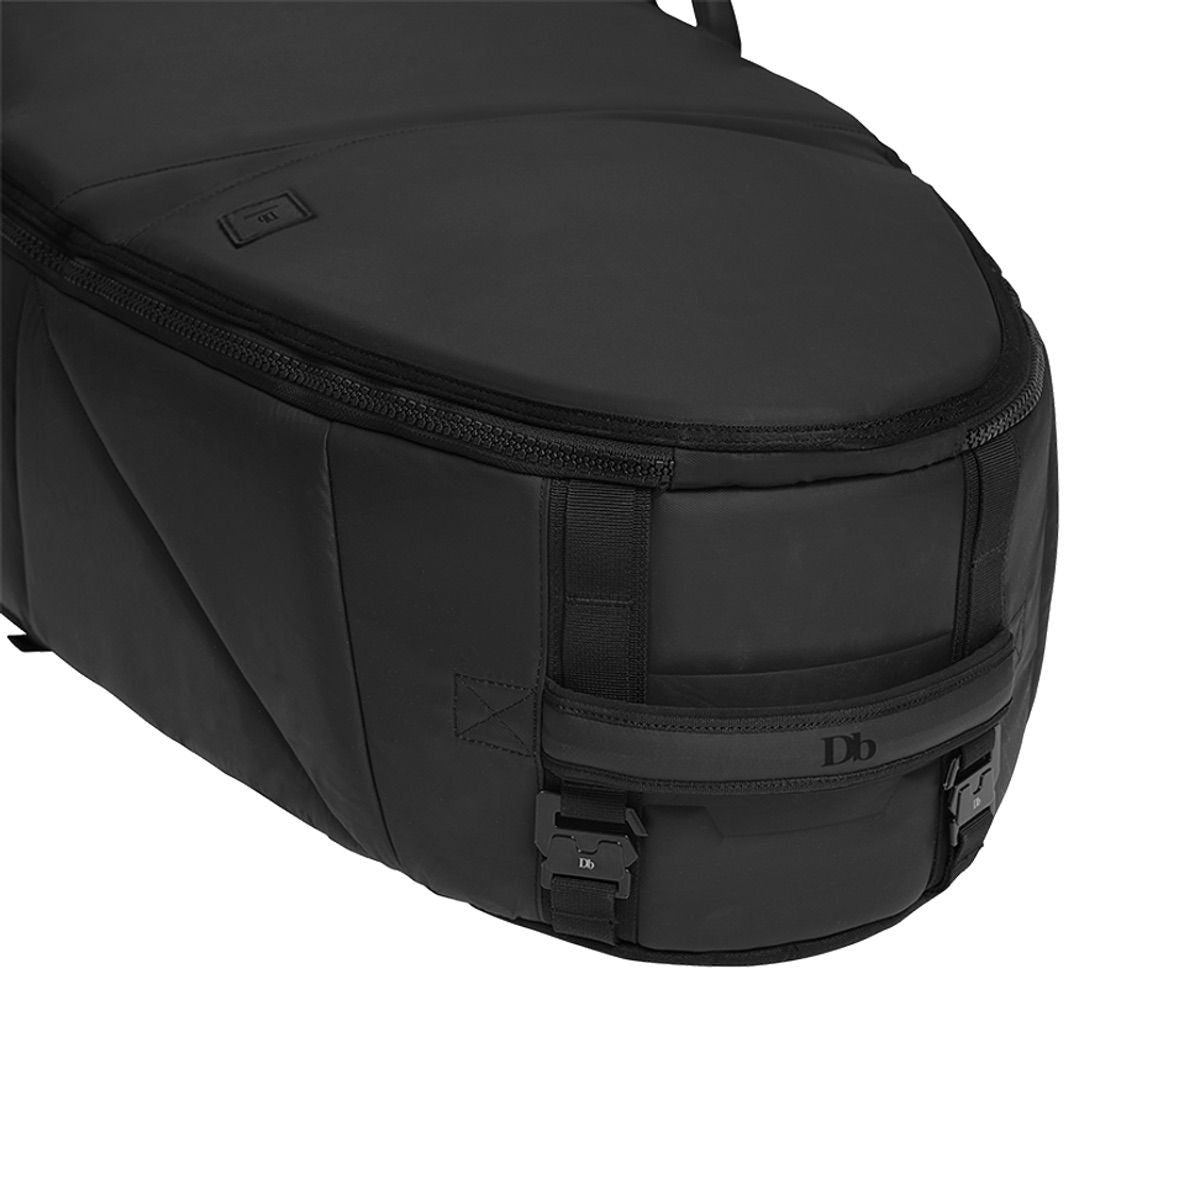 
                  
                    Db Surf Luggage - The Djärv Board Bag - The Coffin Surfbag - Black Out - 3 to 4 boards up to 6’6”
                  
                